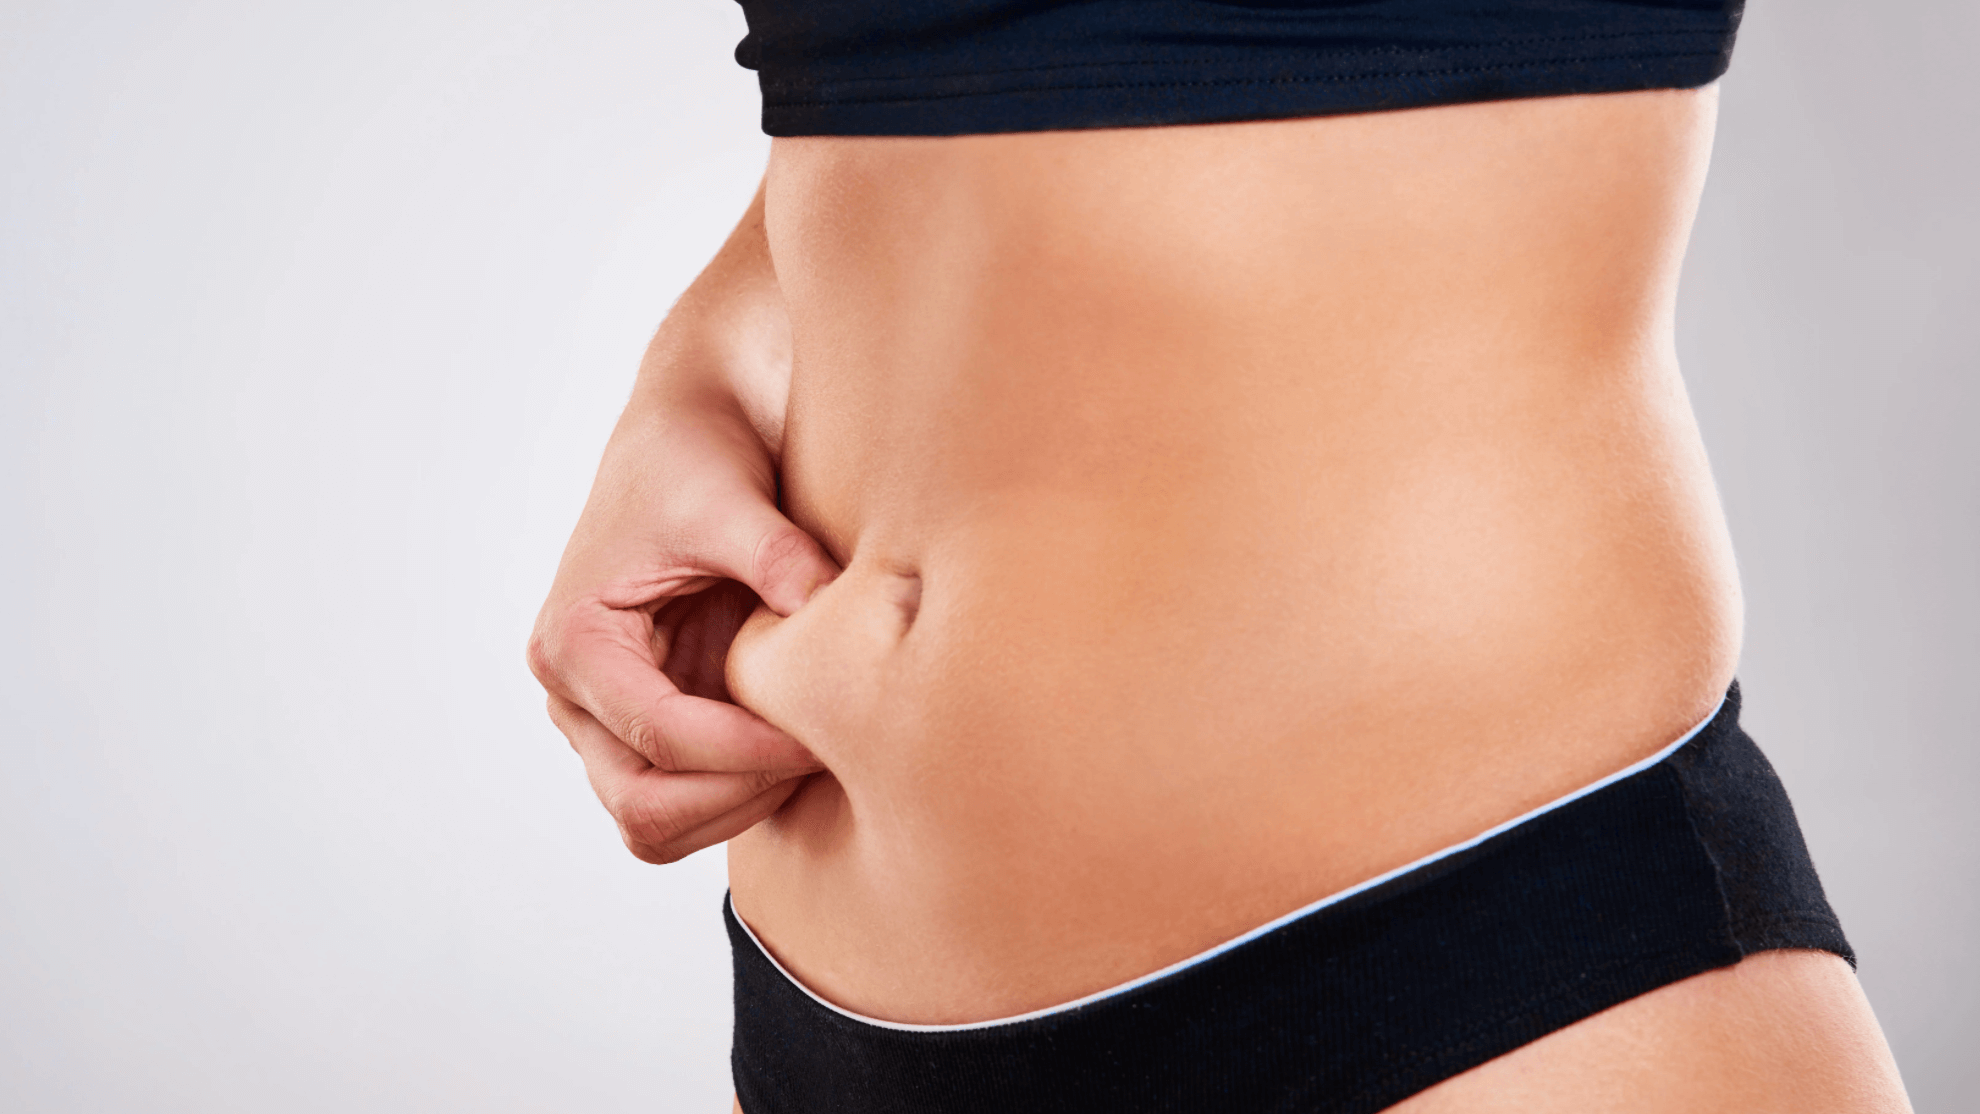 REDUCE HANGING BELLY FAT  We all want to have a flat belly to